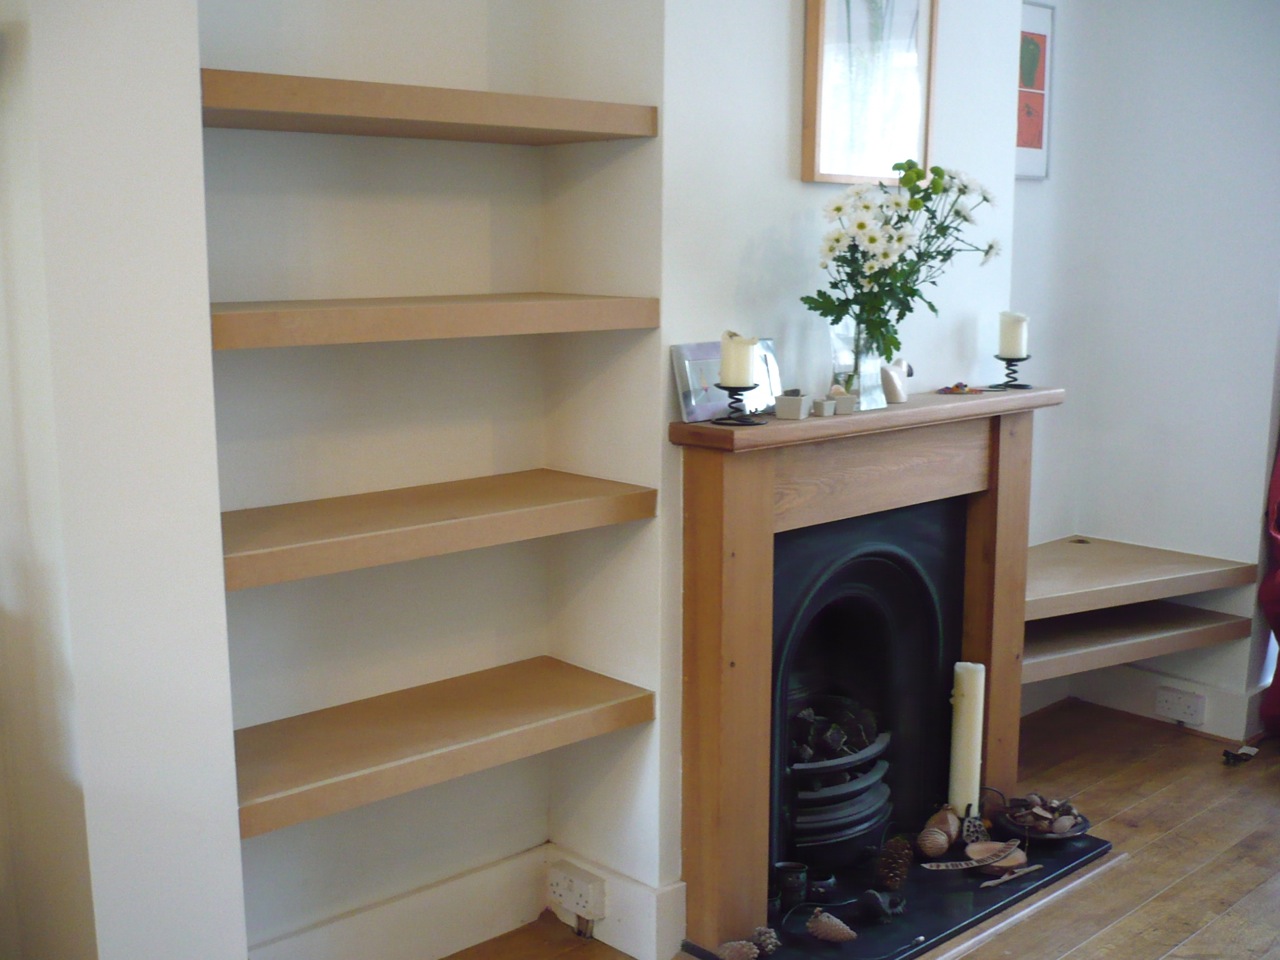 alcove shelves for books and tv